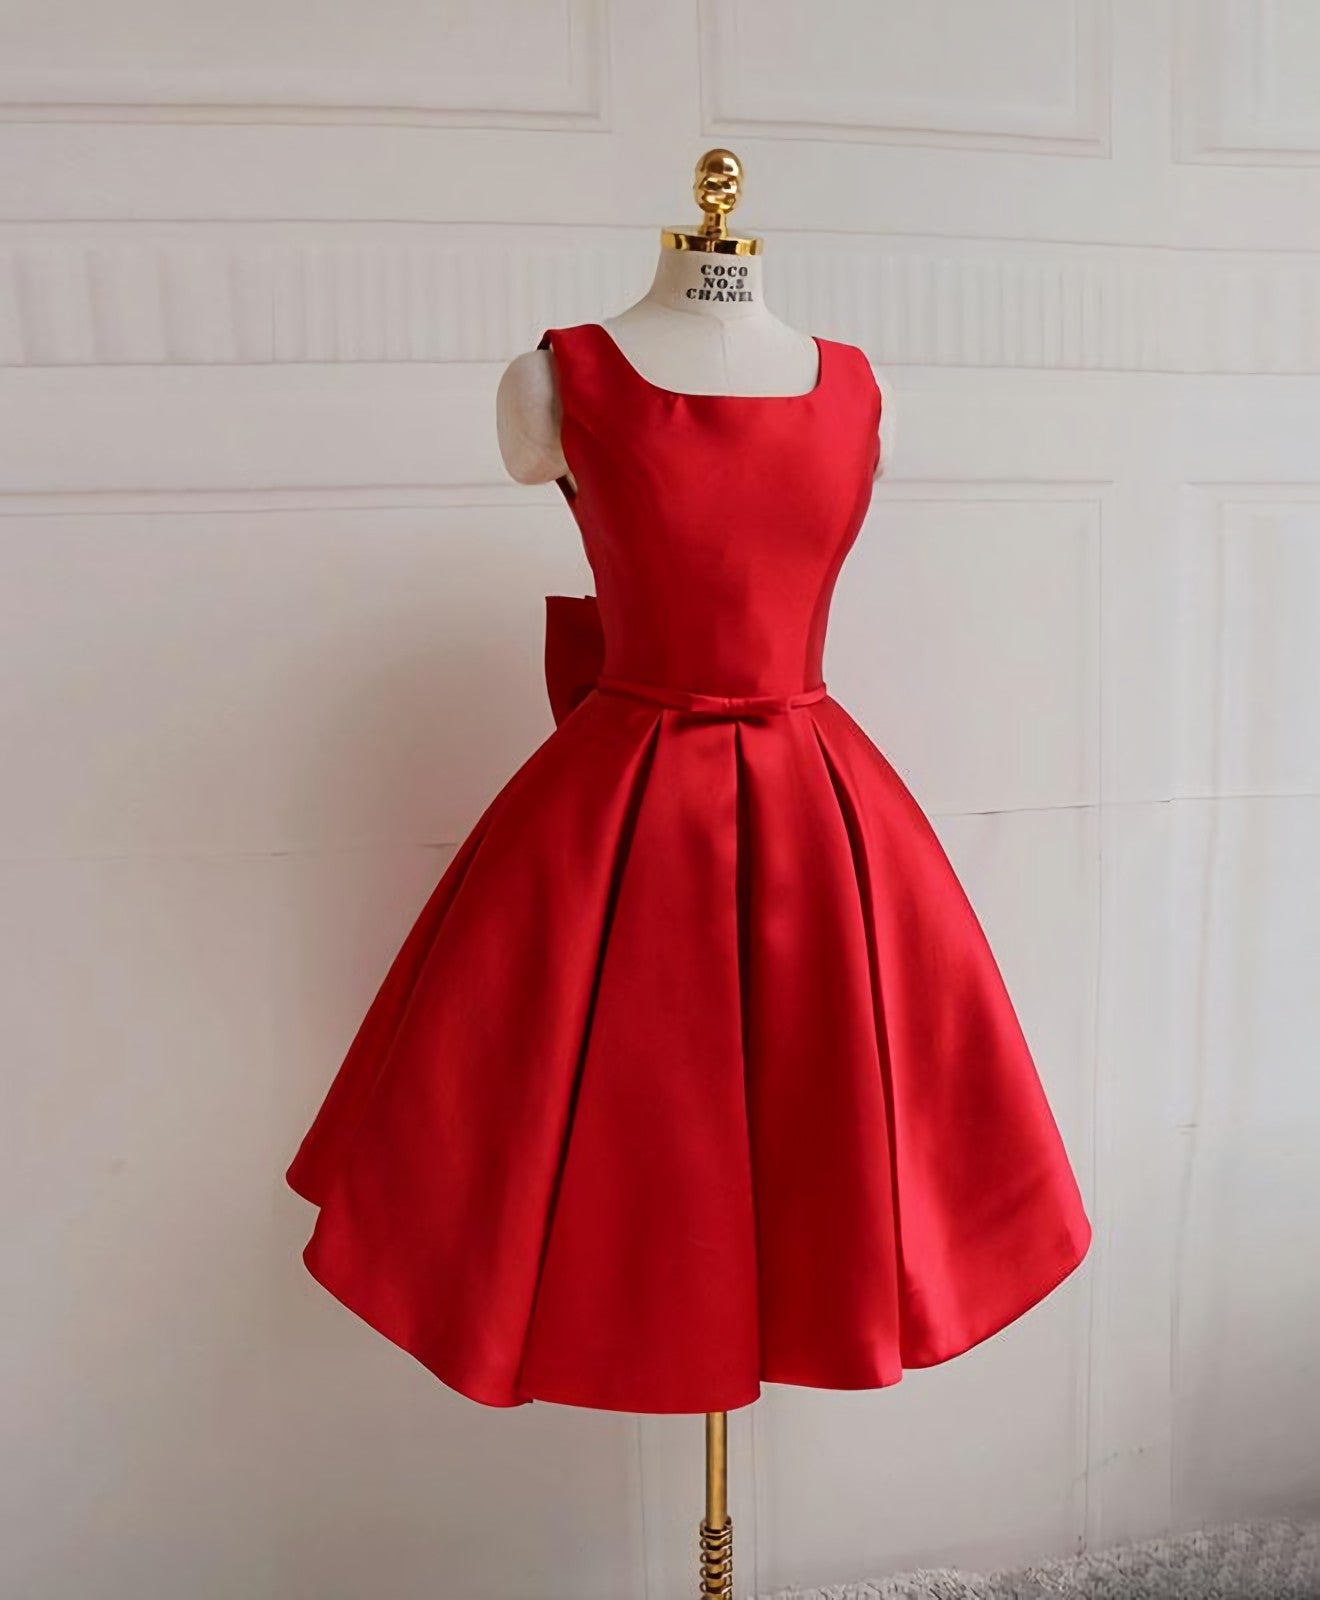 Formal Dresses For Wedding Guest, Cute A Line Satin Short Prom Dress, With Bow Evenig Dress